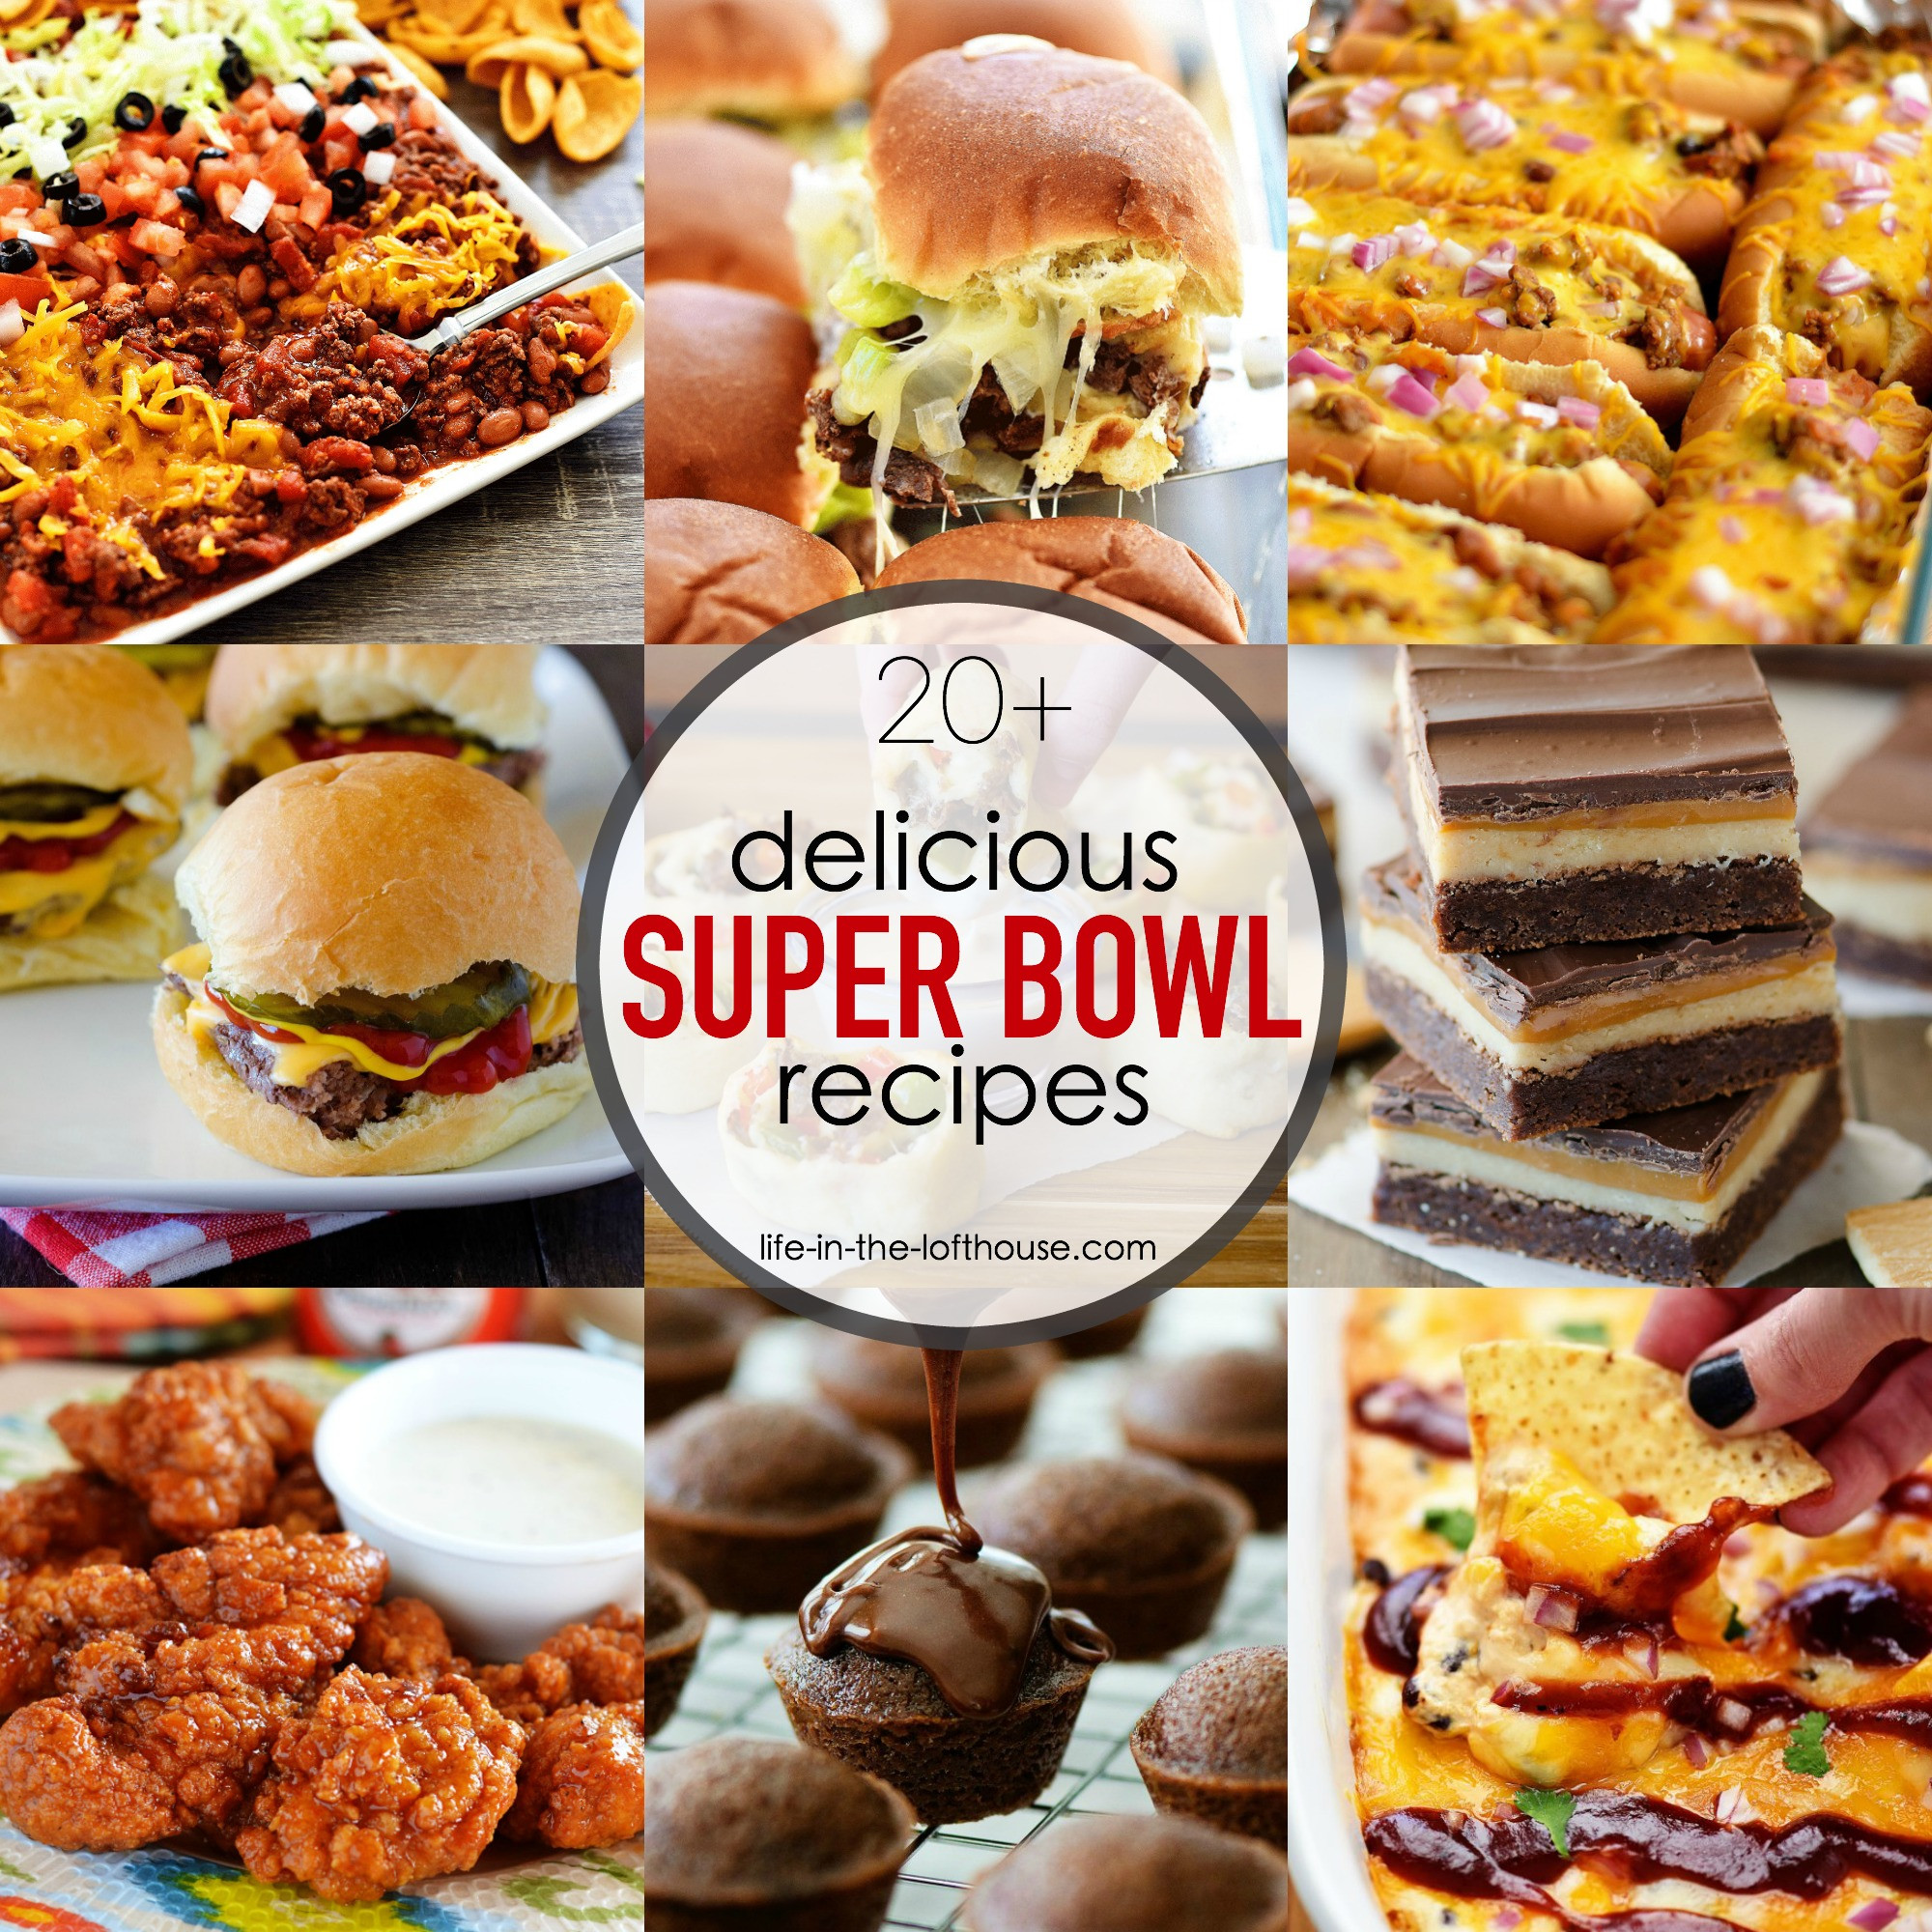 Recipes For Super Bowl
 20 Super Bowl Recipes Life In The Lofthouse